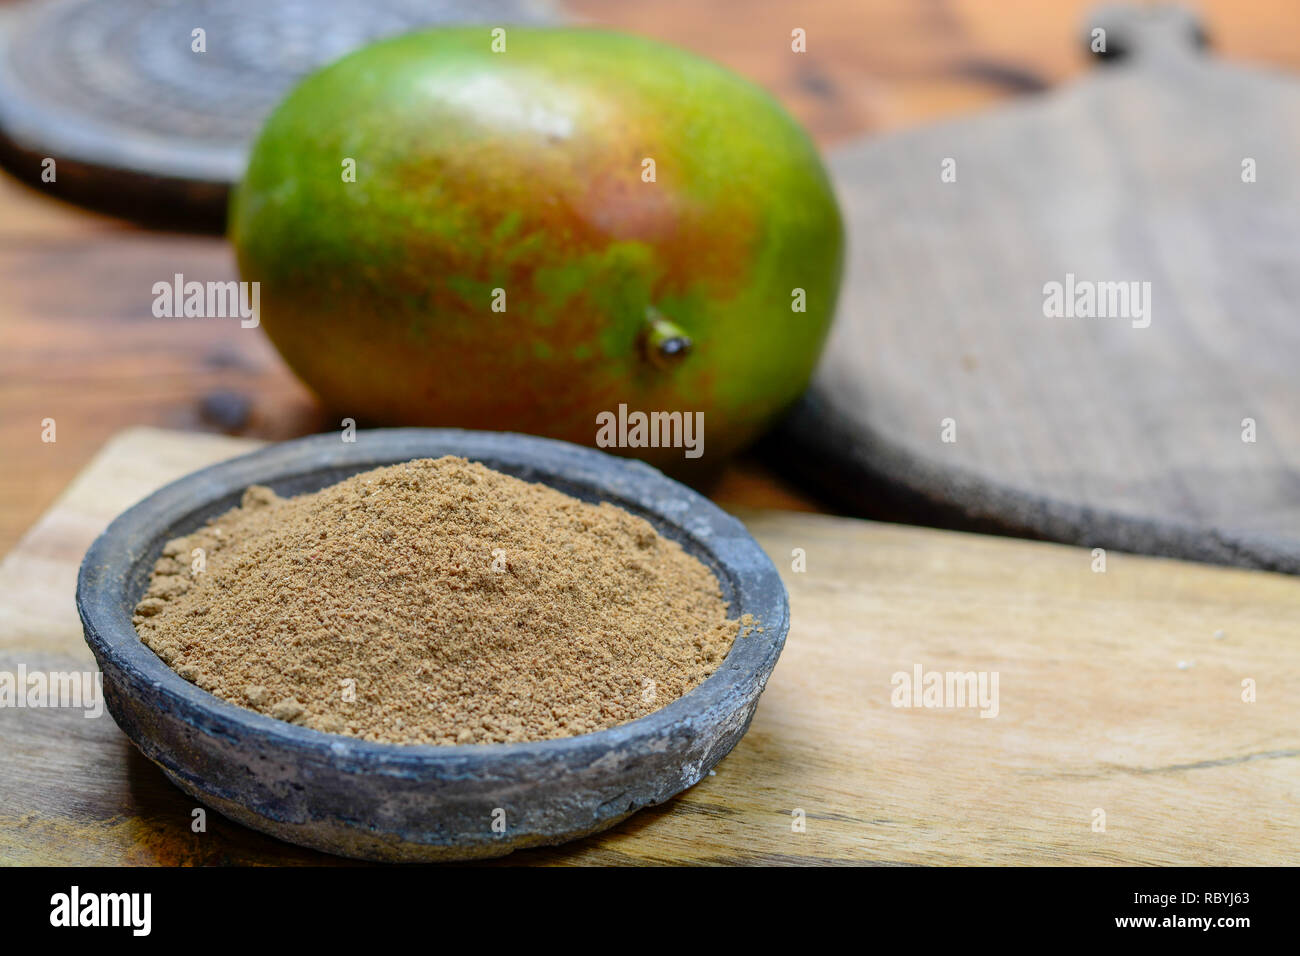 Amchoor or aamchur, mango powder, fruity spice powder made from dried unripe green mangoes in India, used to flavor foods close-up Stock Photo